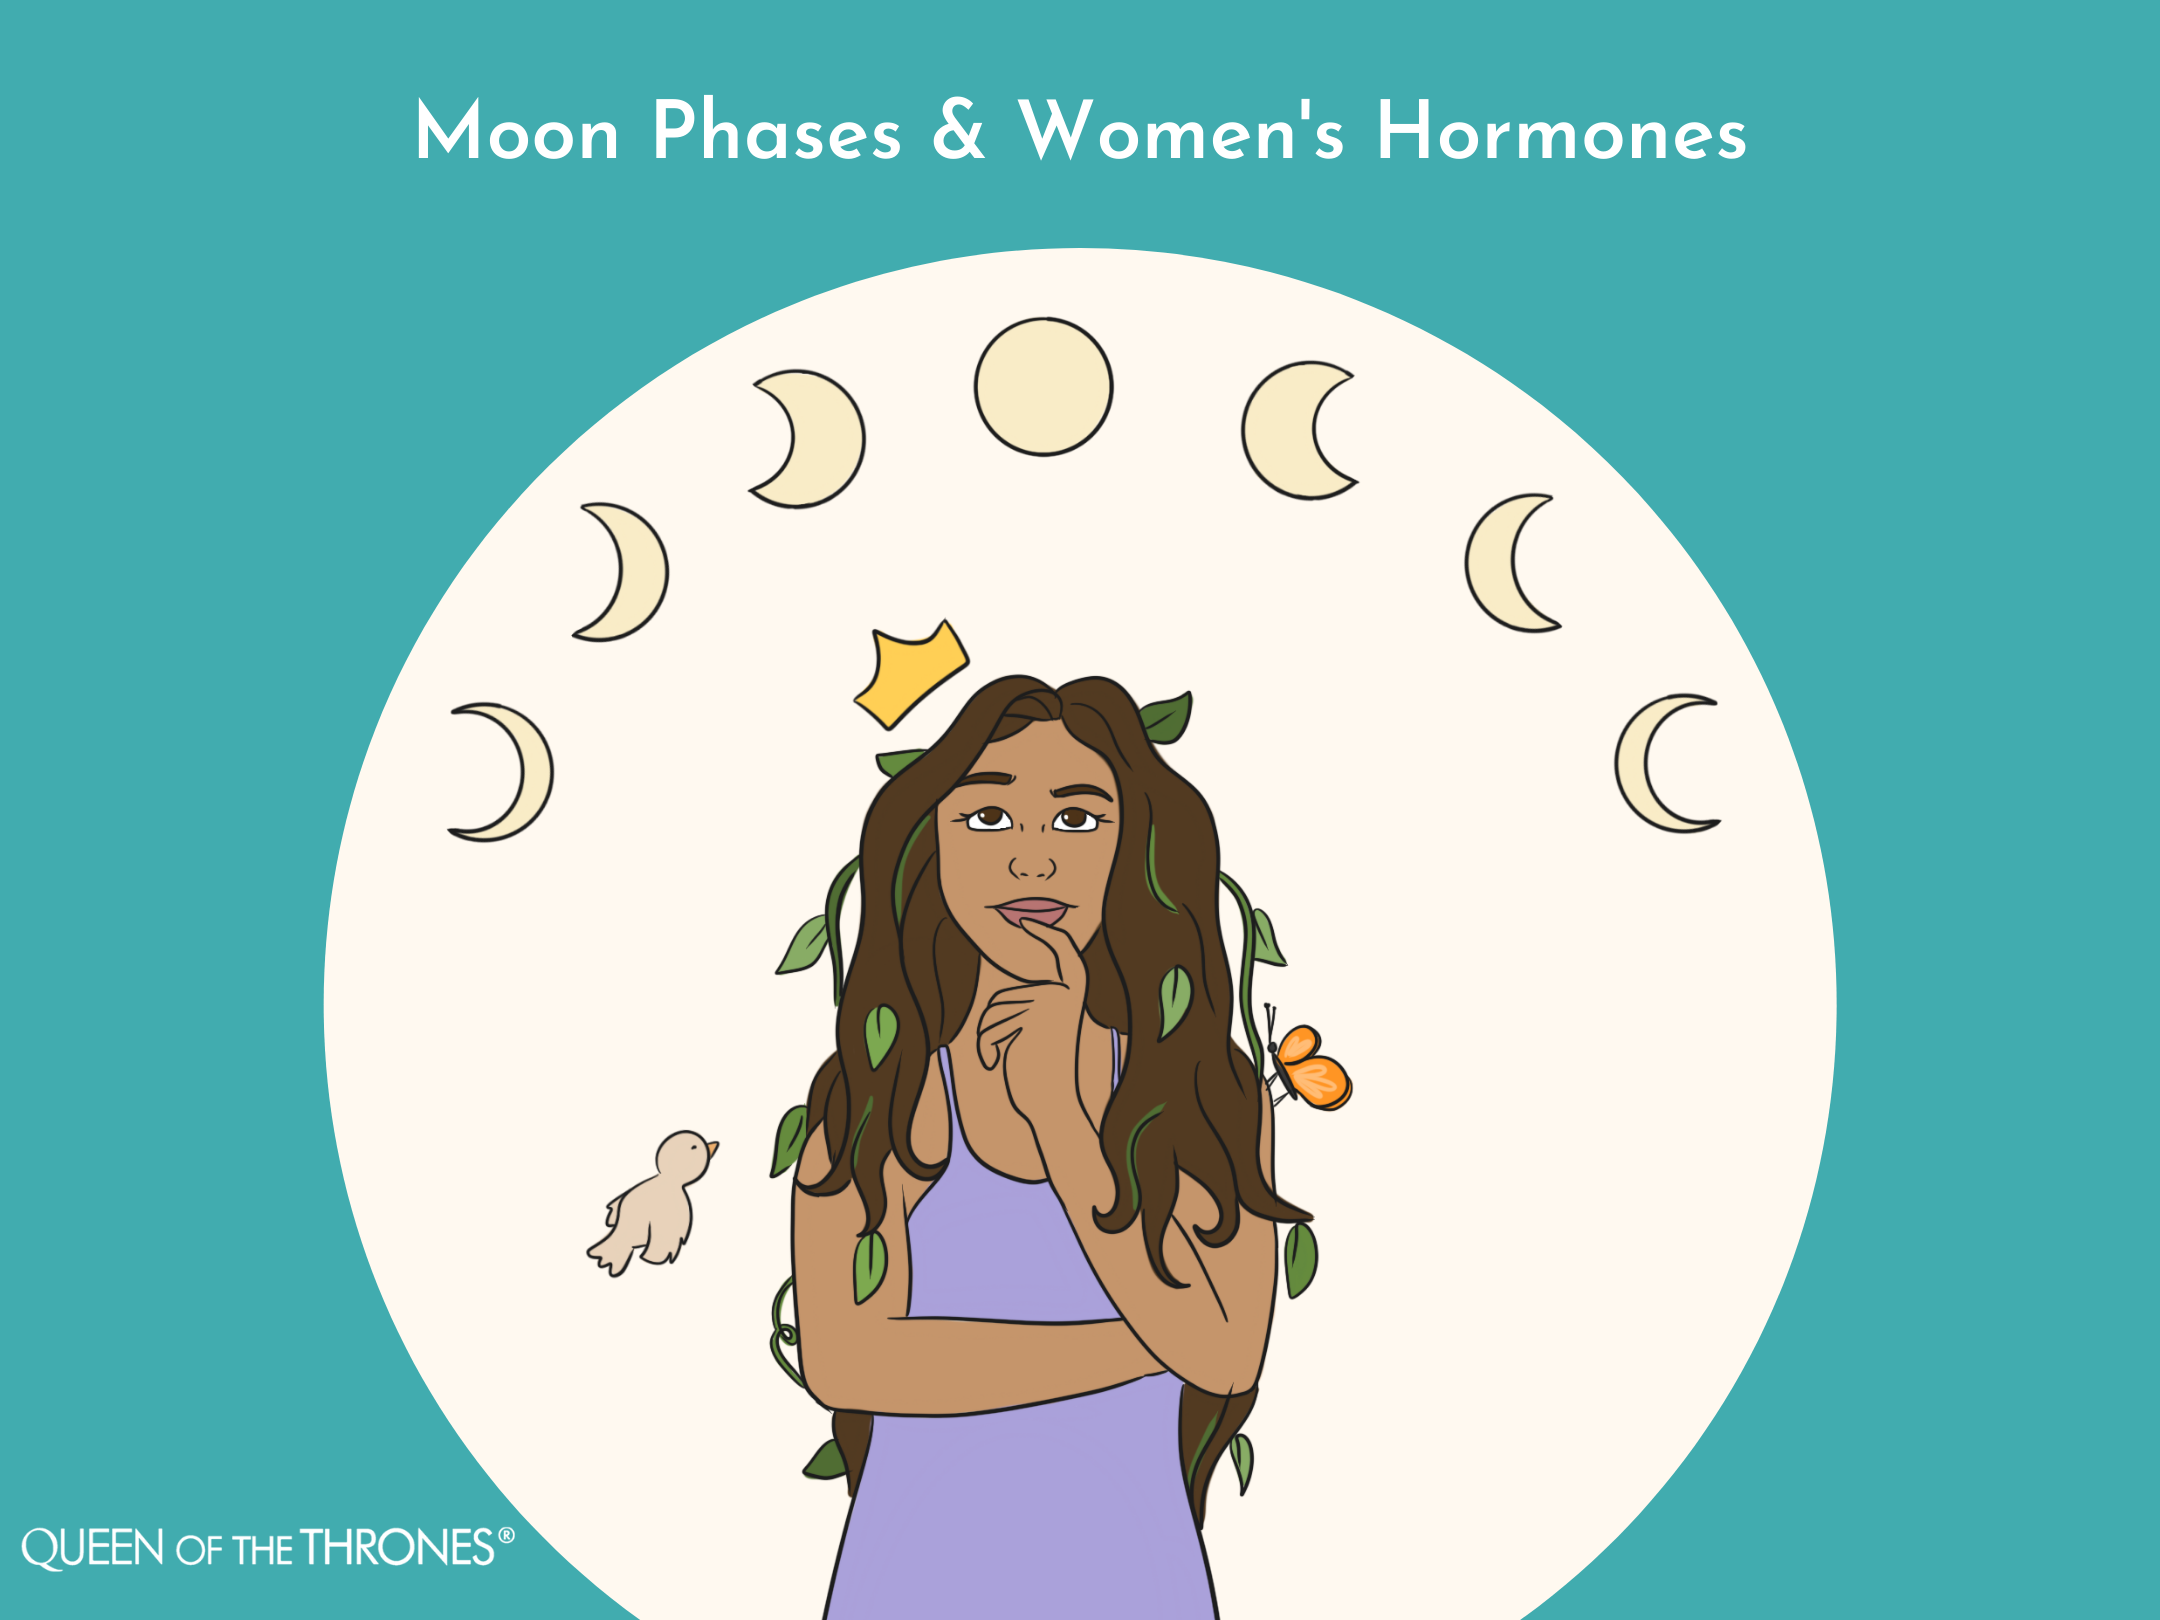 Mother nature moon phases by Queen of the Thrones